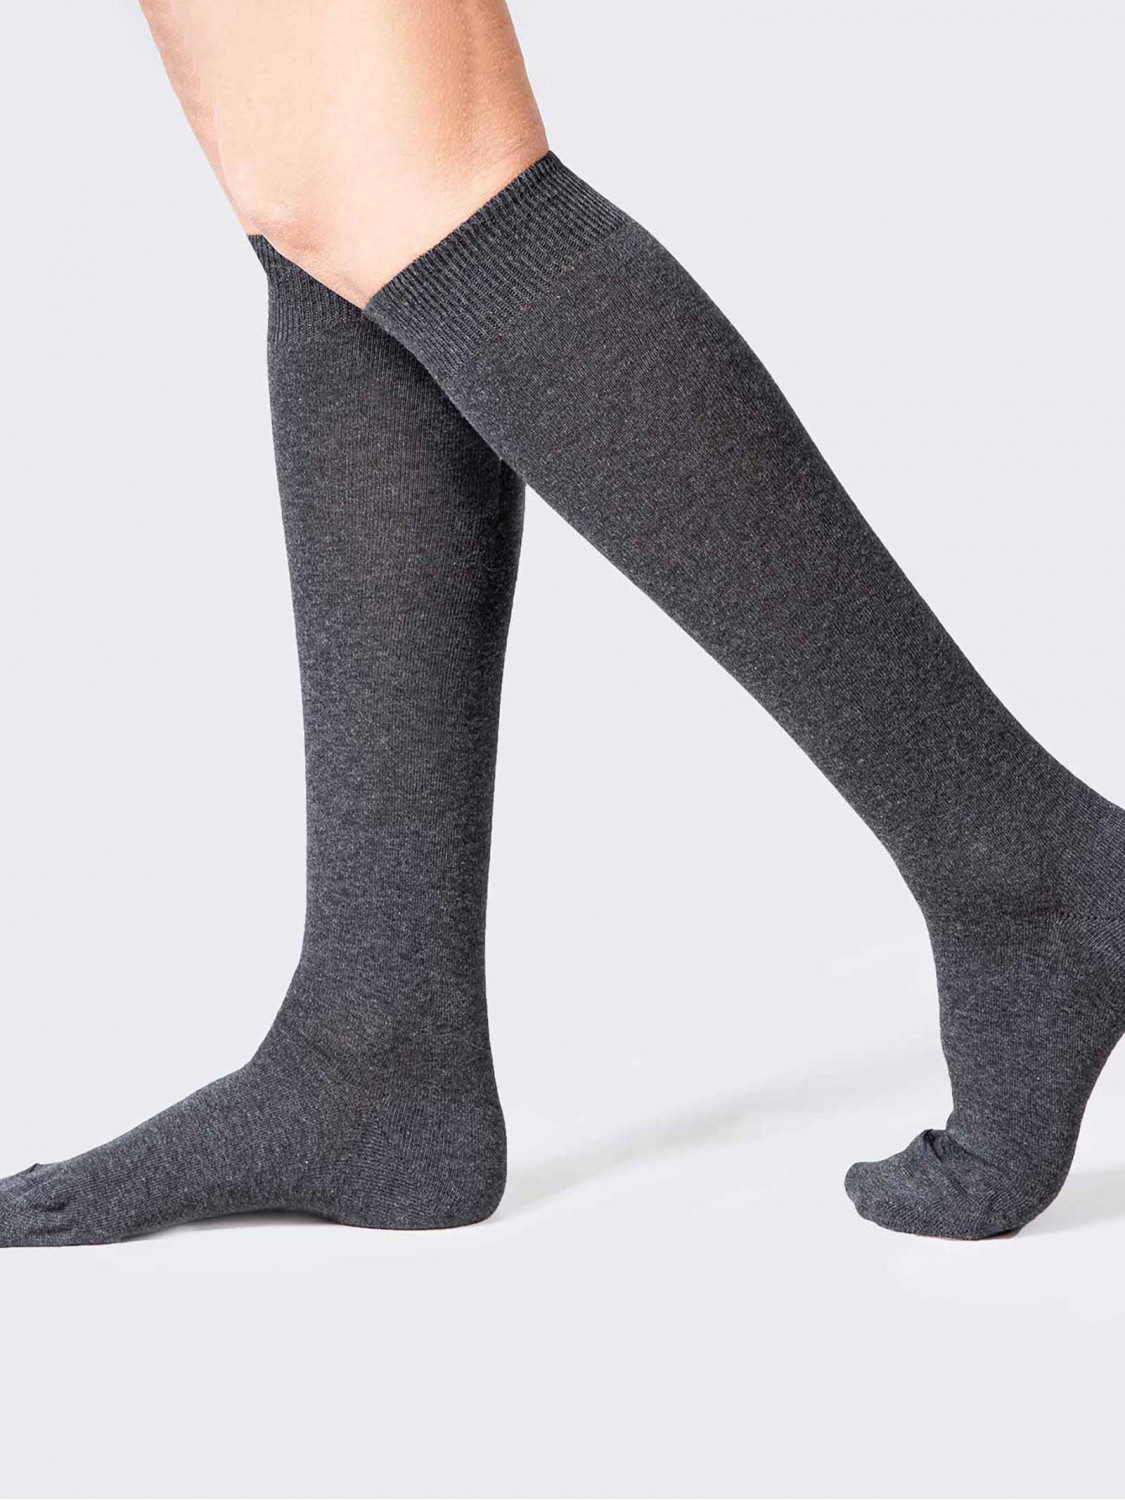 Warm cotton Knee high socks - Made in Italy